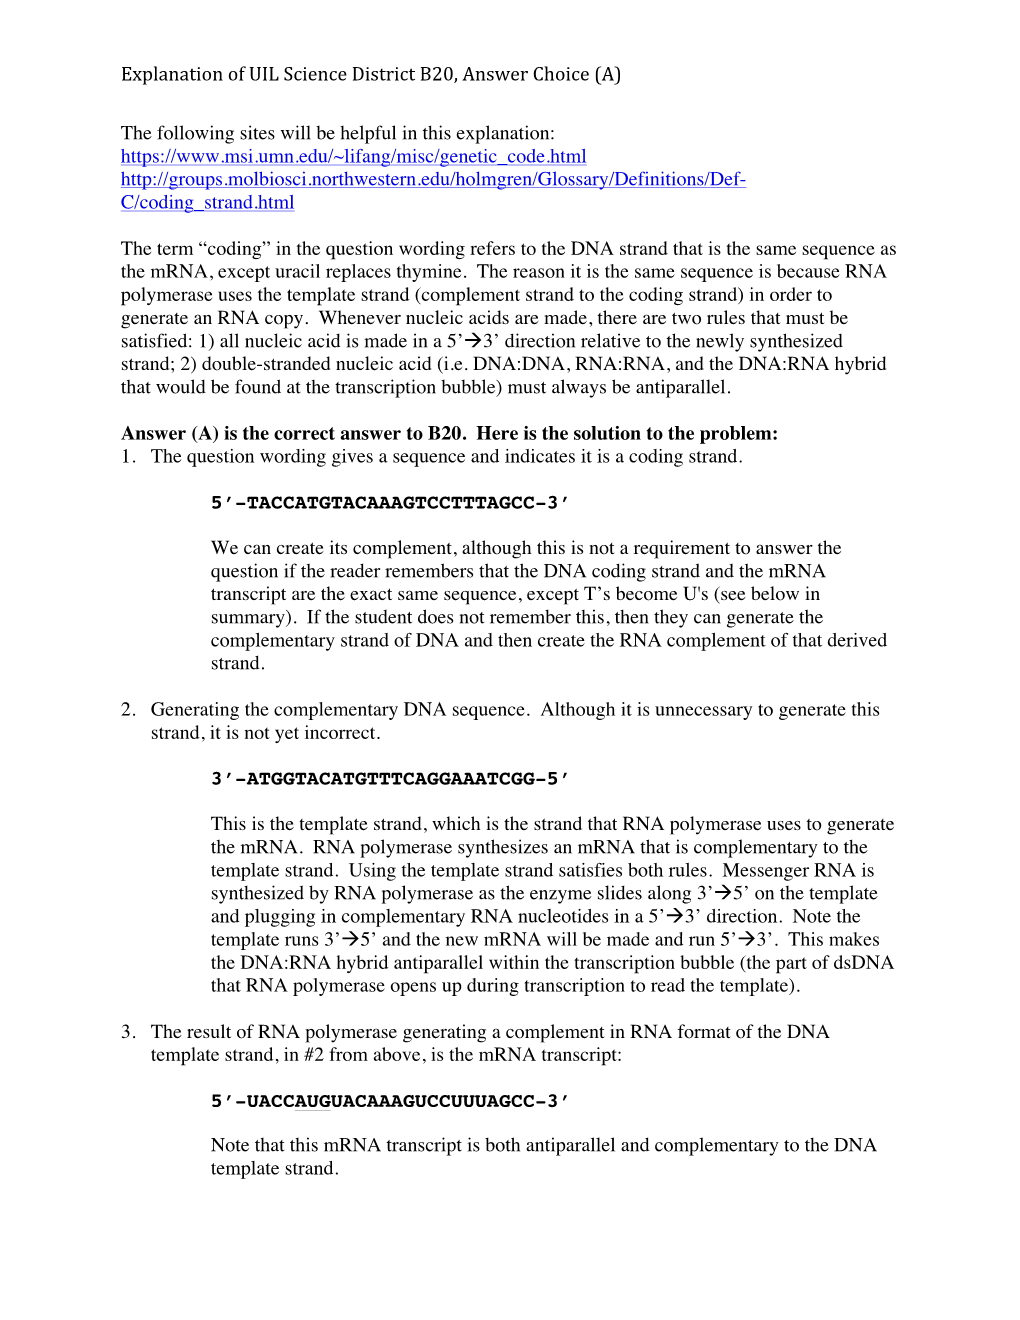 Explanation of UIL Science District B20, Answer Choice (A) The